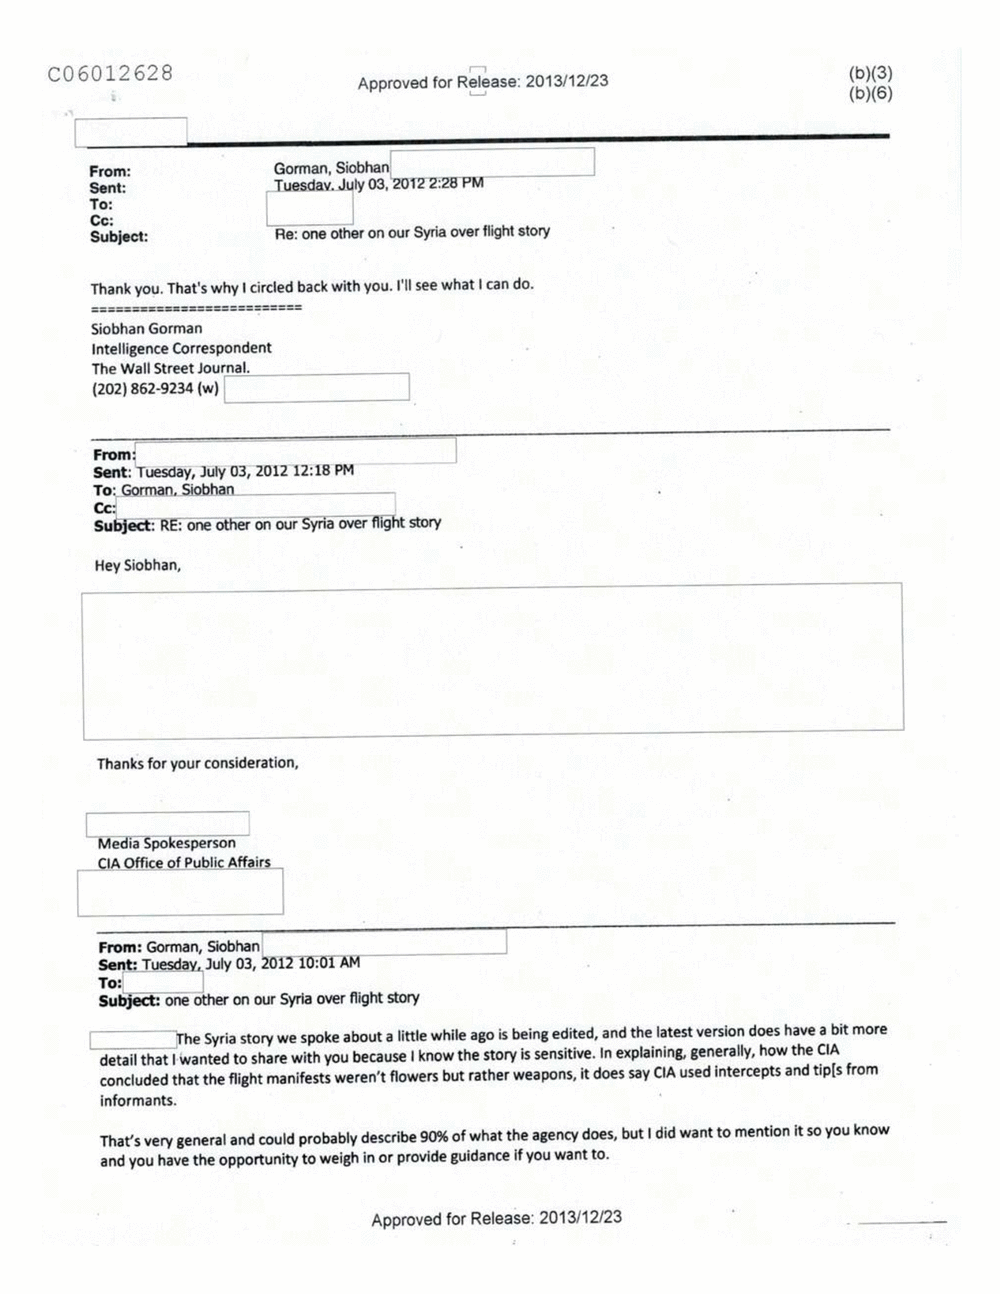 Page 184 from Email Correspondence Between Reporters and CIA Flacks